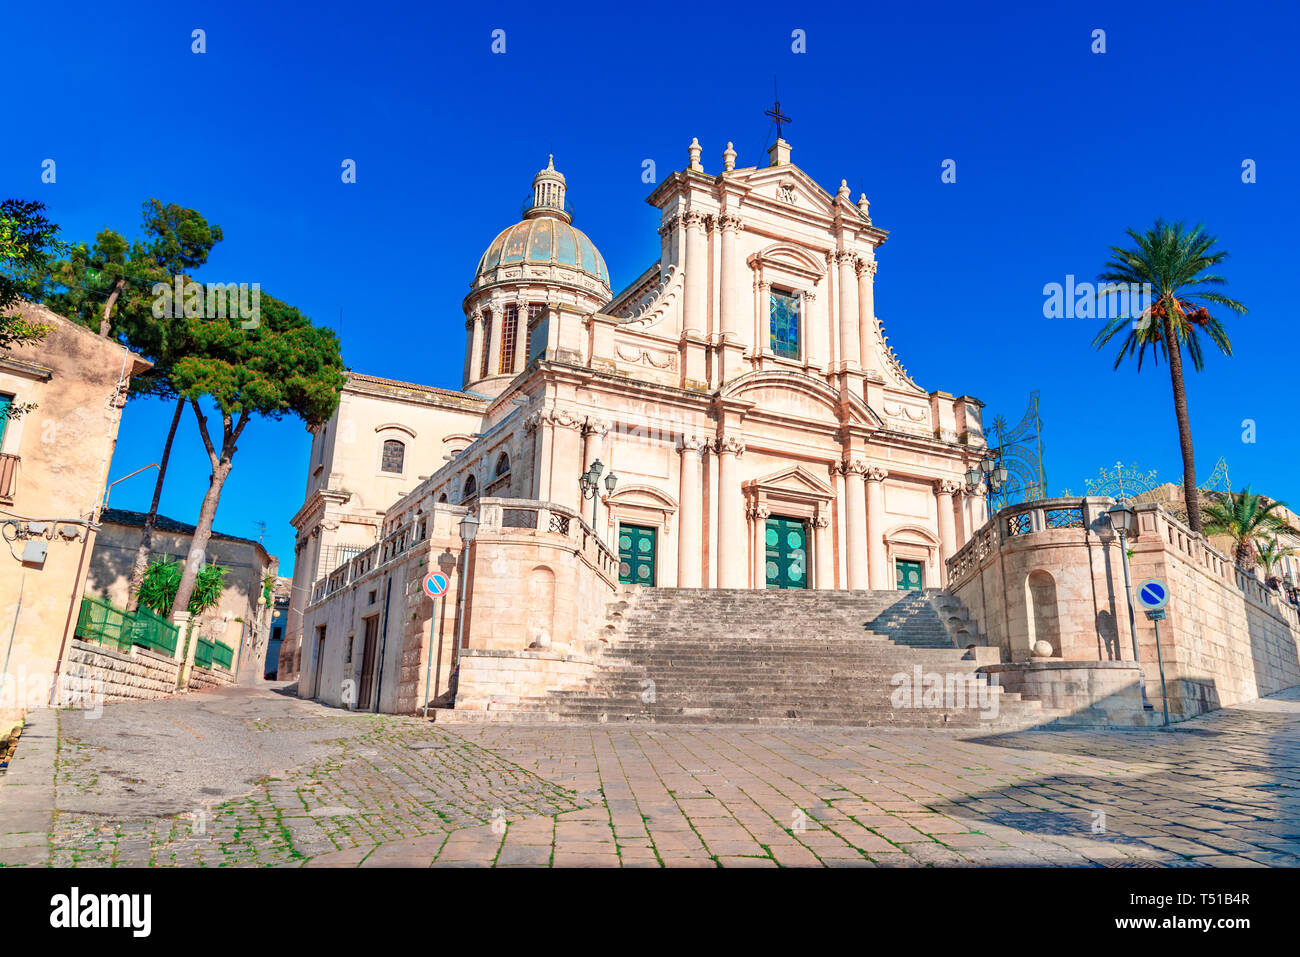 Comiso, Sicily island, Italy: The Neoclassicist Church of the Annunziata,16th century on the island of Sicily, Italy Stock Photo